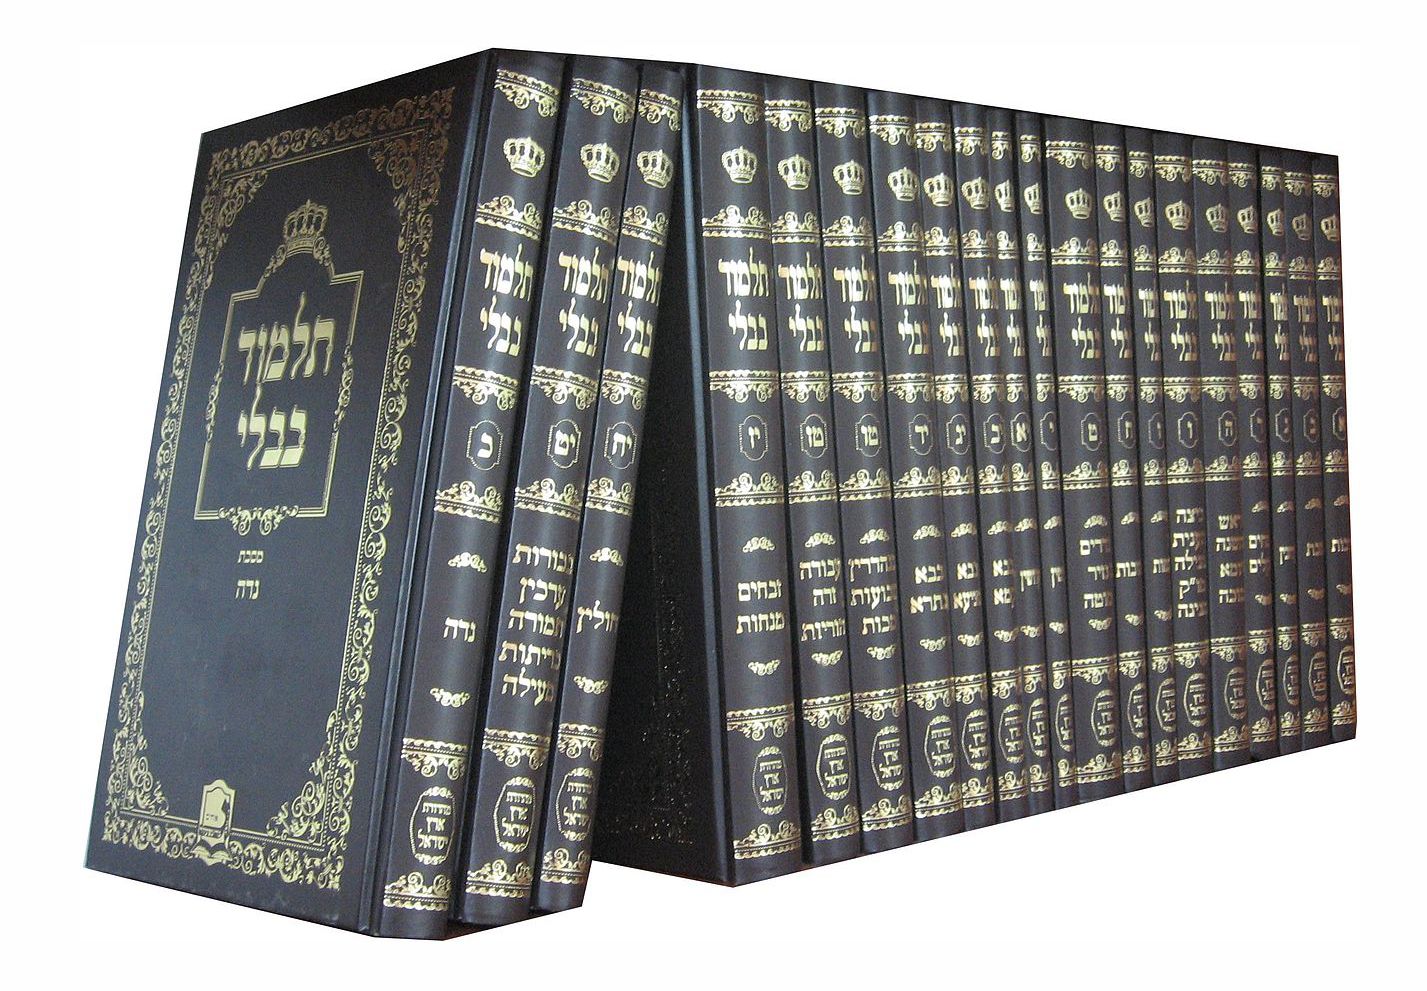 Why We Ignore the Talmud